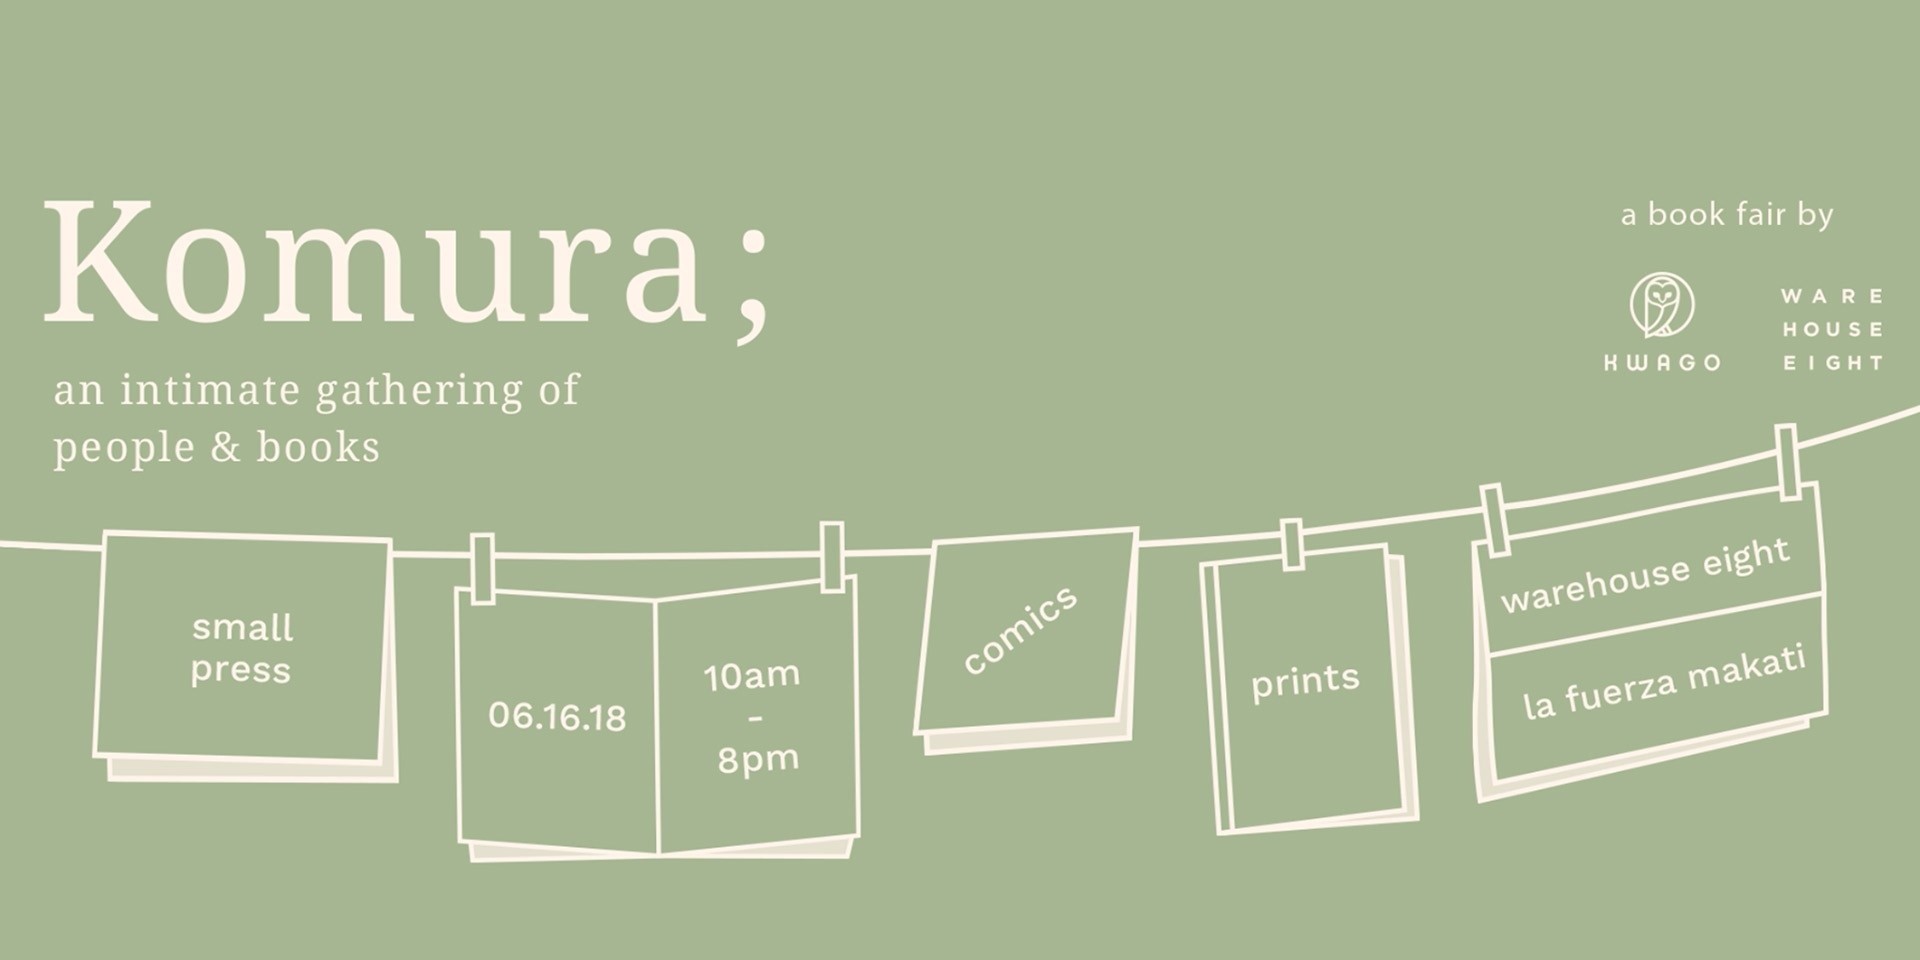 Explore a new form of storytelling at the Komura; book fair this weekend